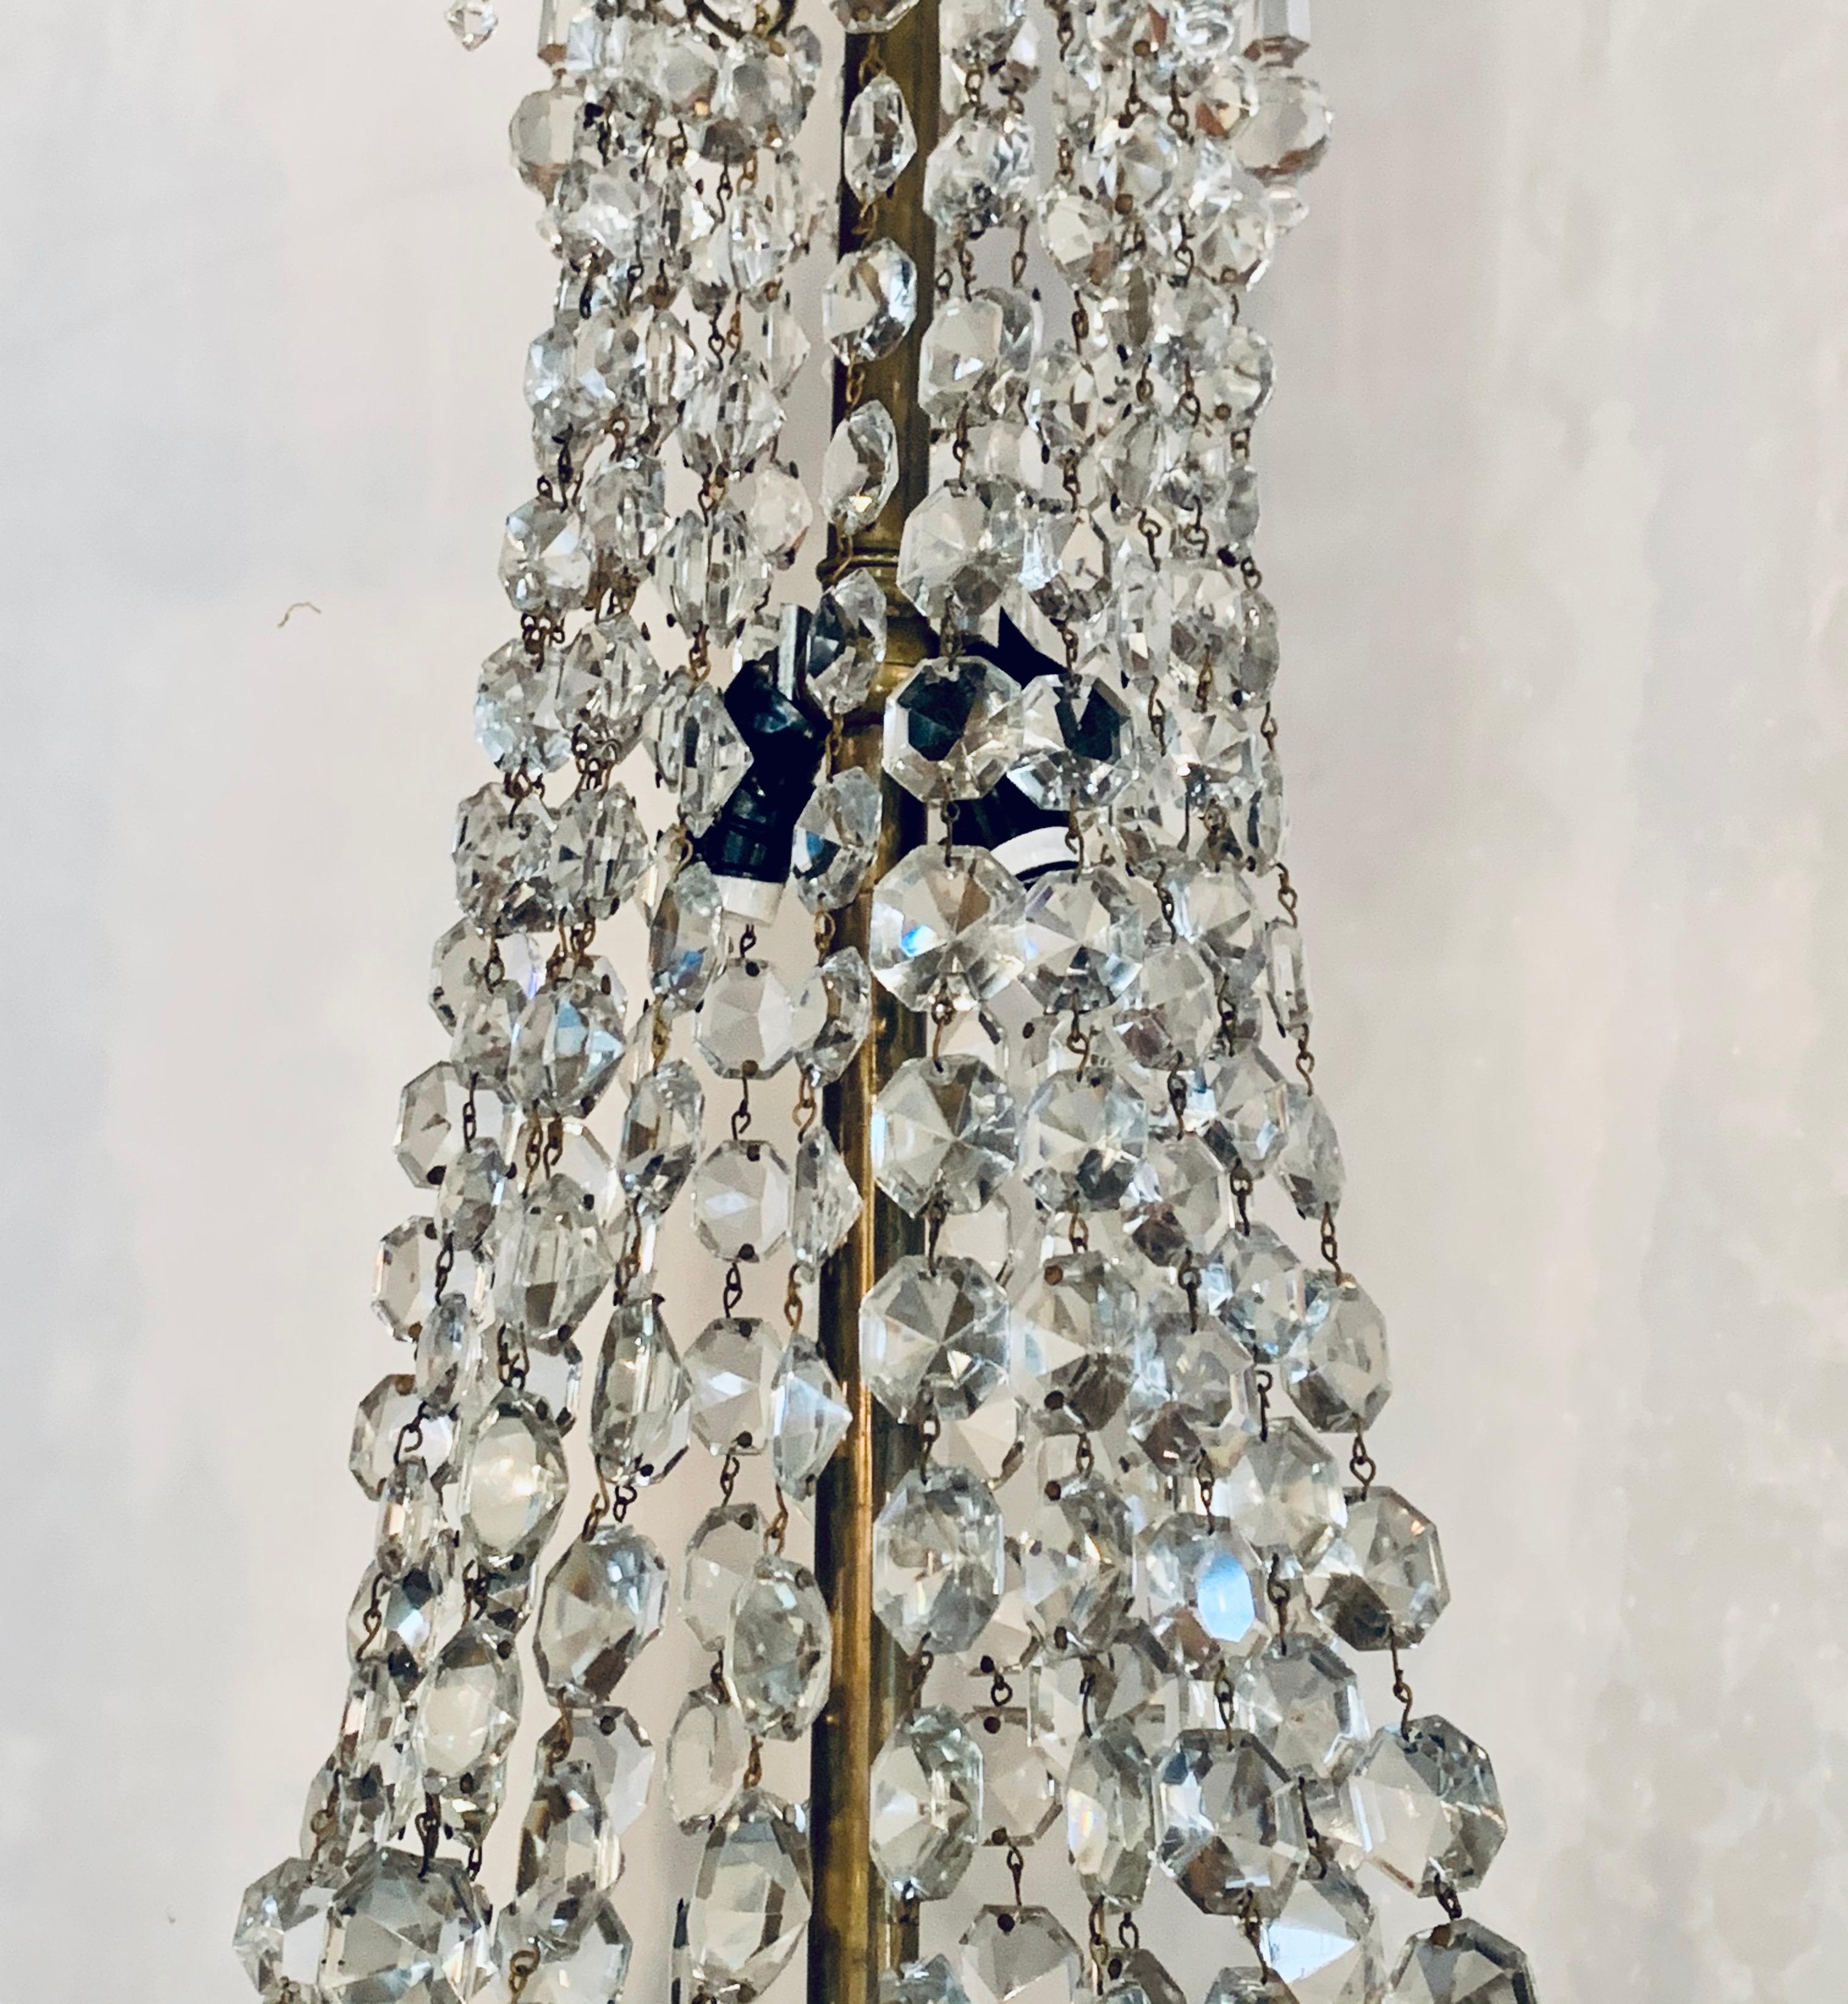 Antique 1920's French crystal and bronze cascading basket-form chandelier with an embossed bronze band with applied wreaths and ribbon detail all around. Top has long crystal prisms. There are 3 lights inside basket and 2 lites behind cascading.